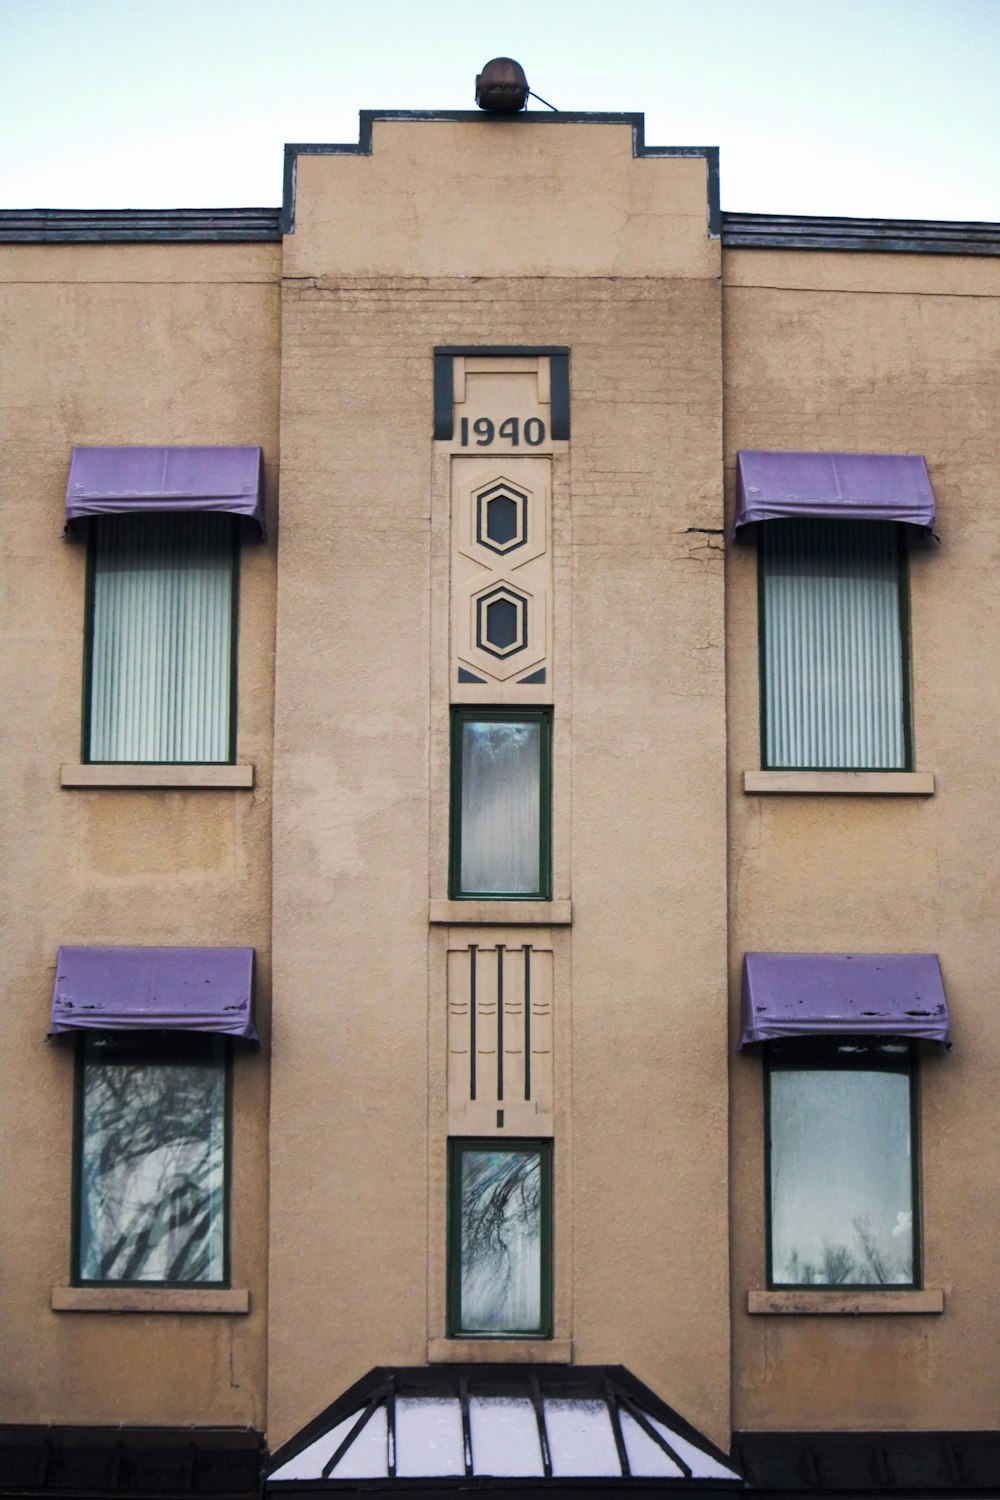 a tall building with purple awnings and windows